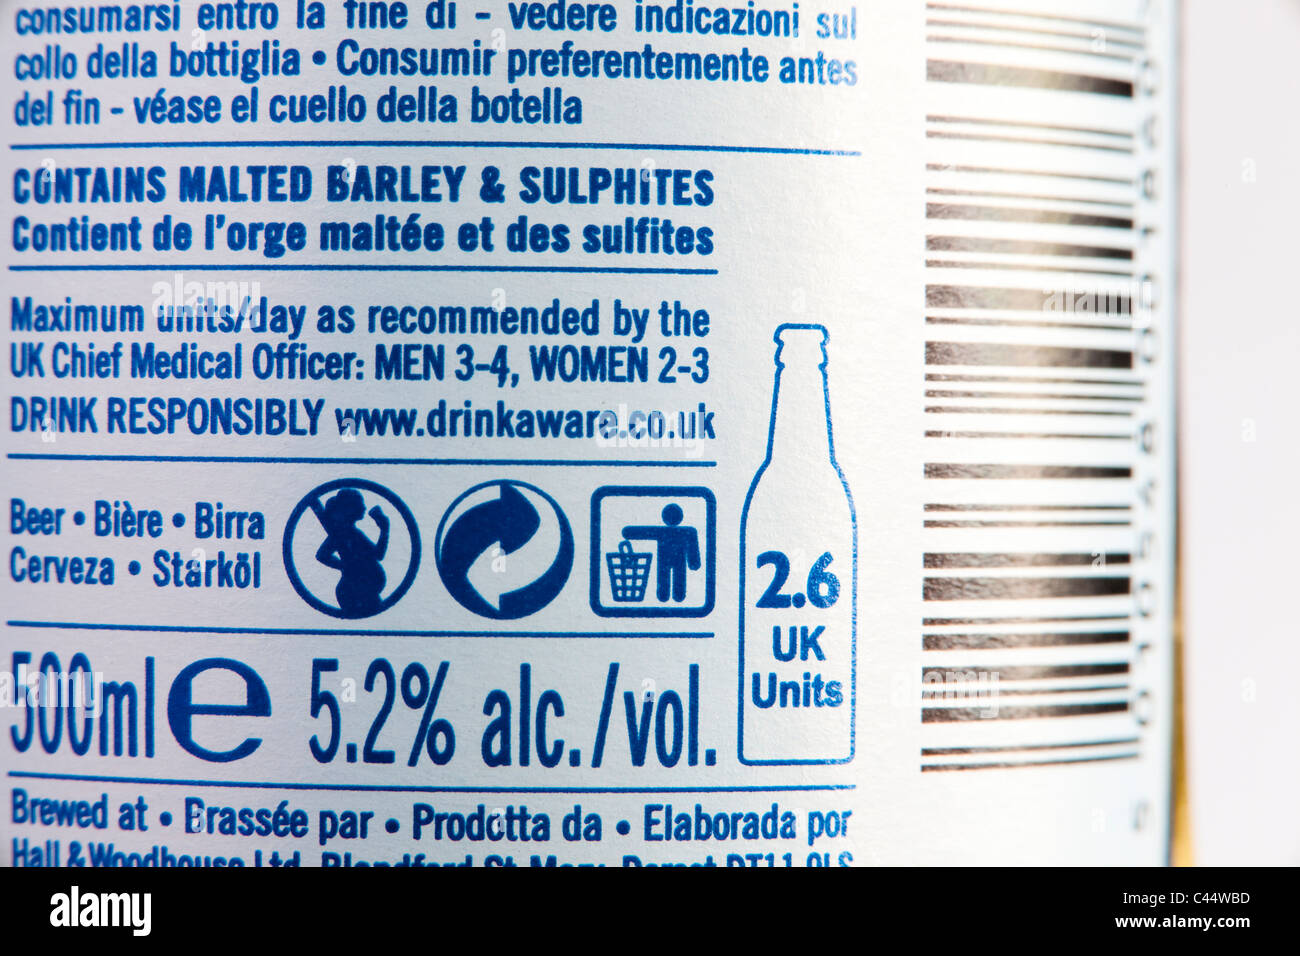 Food labelling on a bottle of beer, showing alcoholic content, units, consumption recommendations and recycling logos. Stock Photo